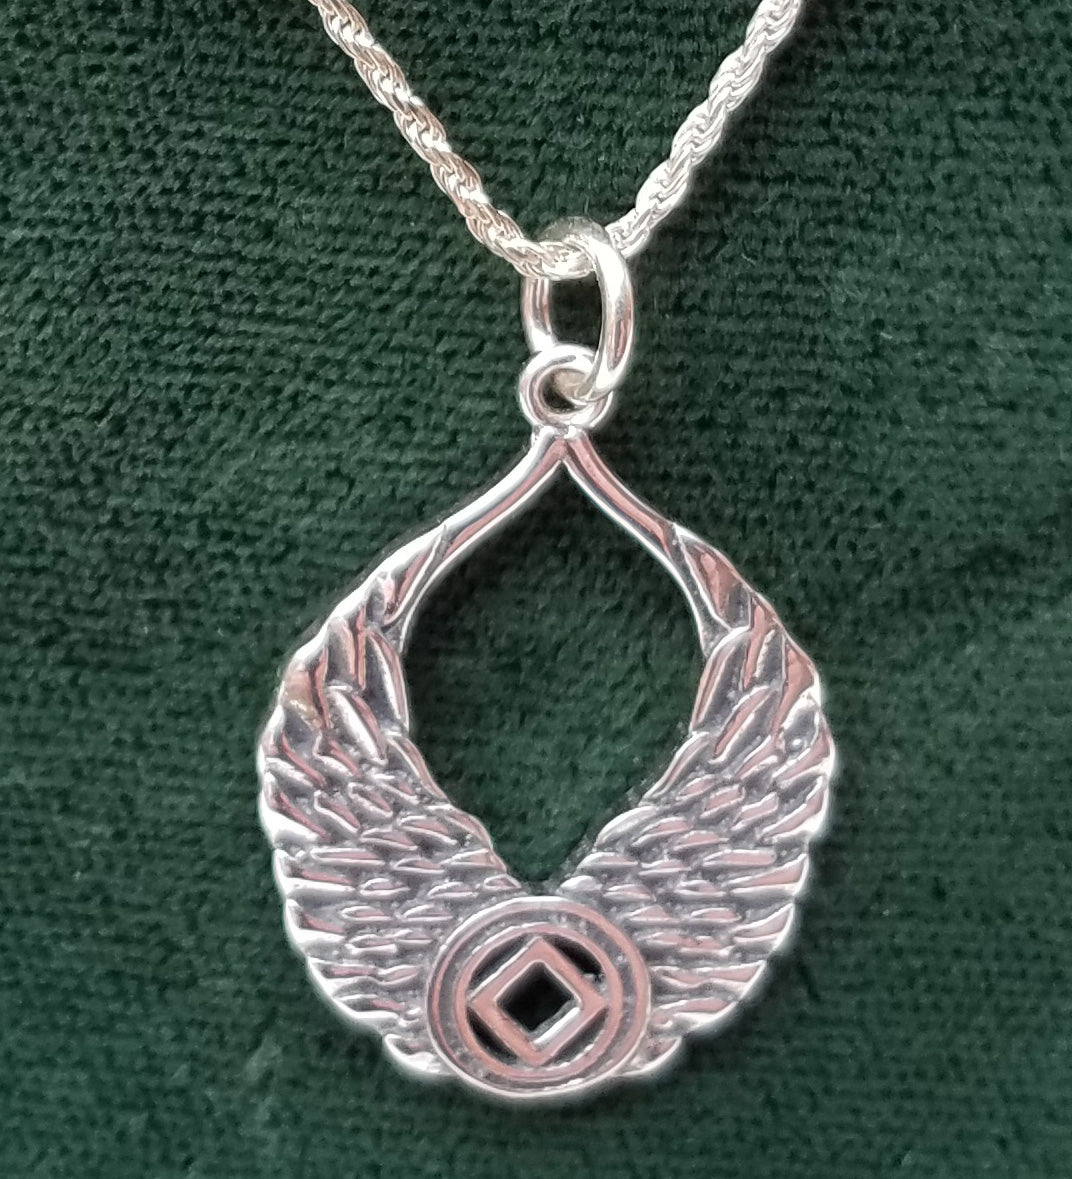 ssj007- Wings With NA Symbol Pendant